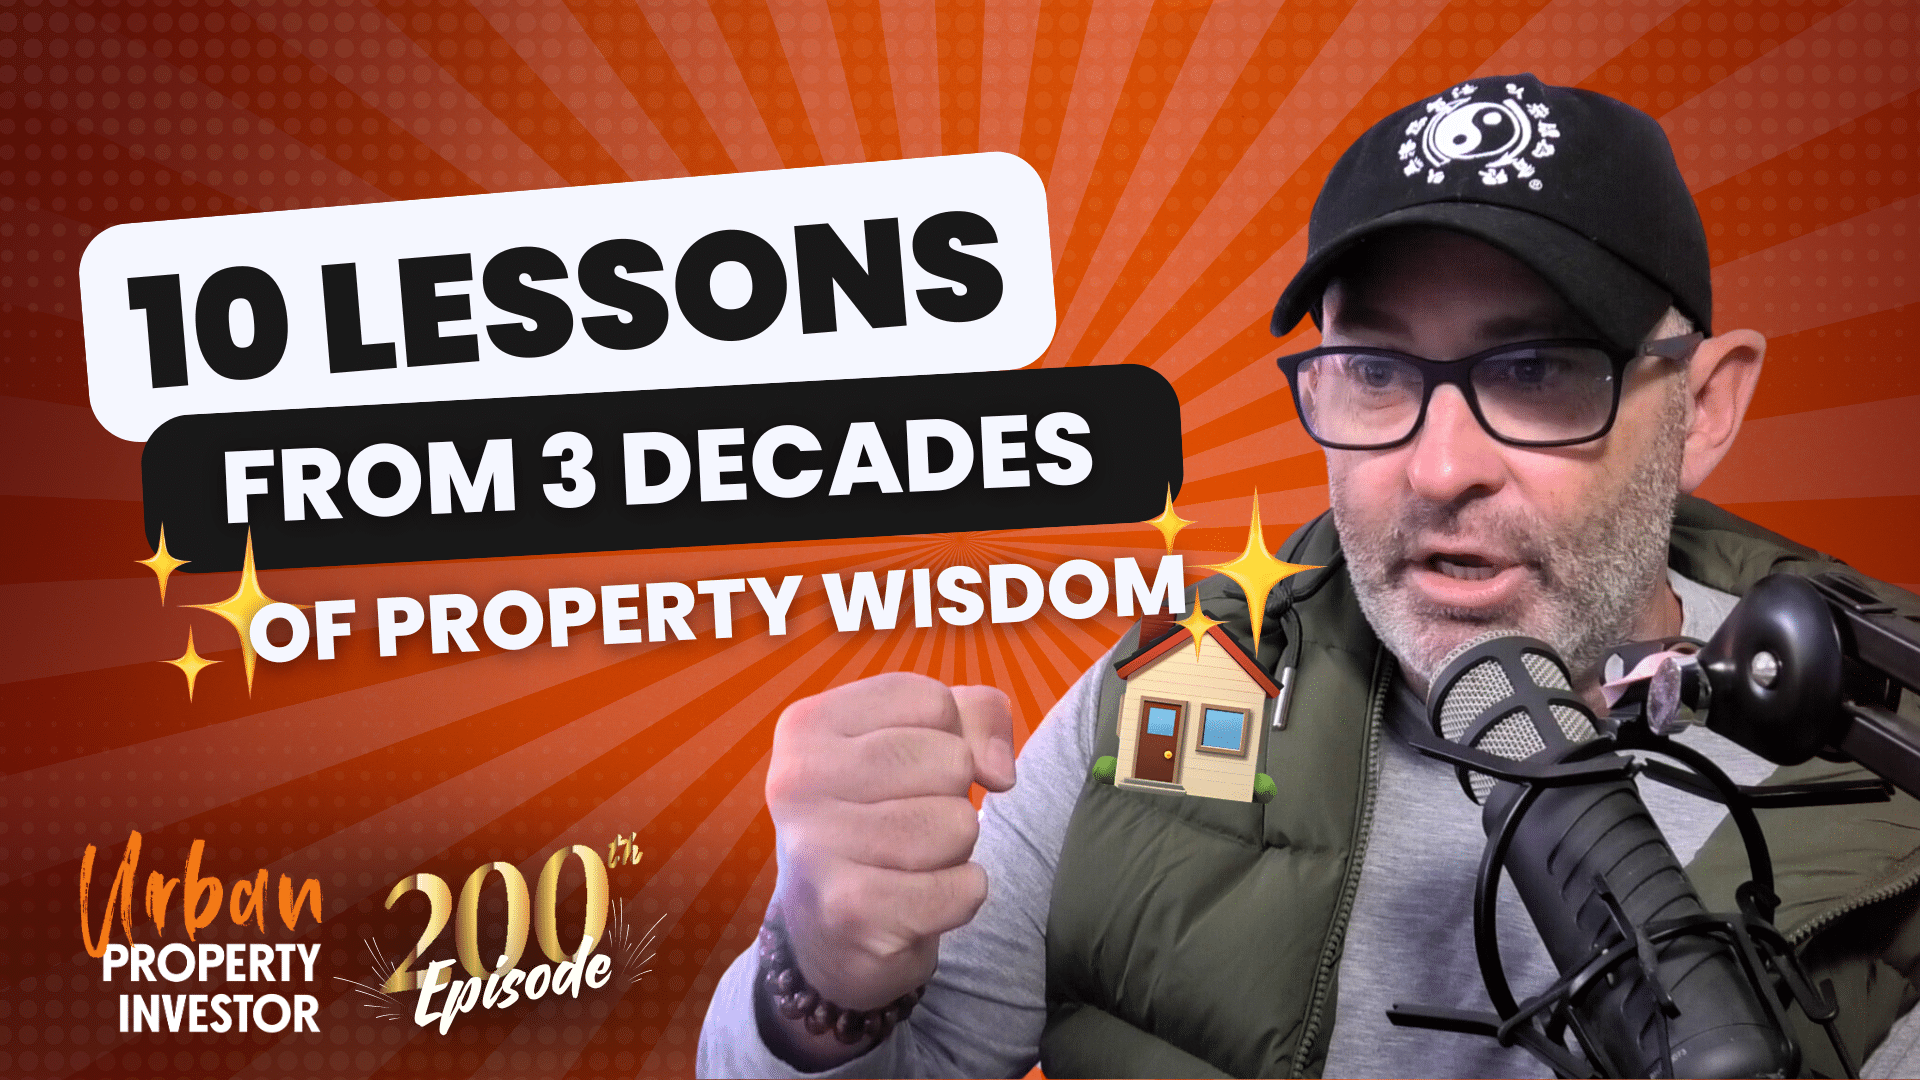 10 Lessons from 3 Decades of Property Wisdom